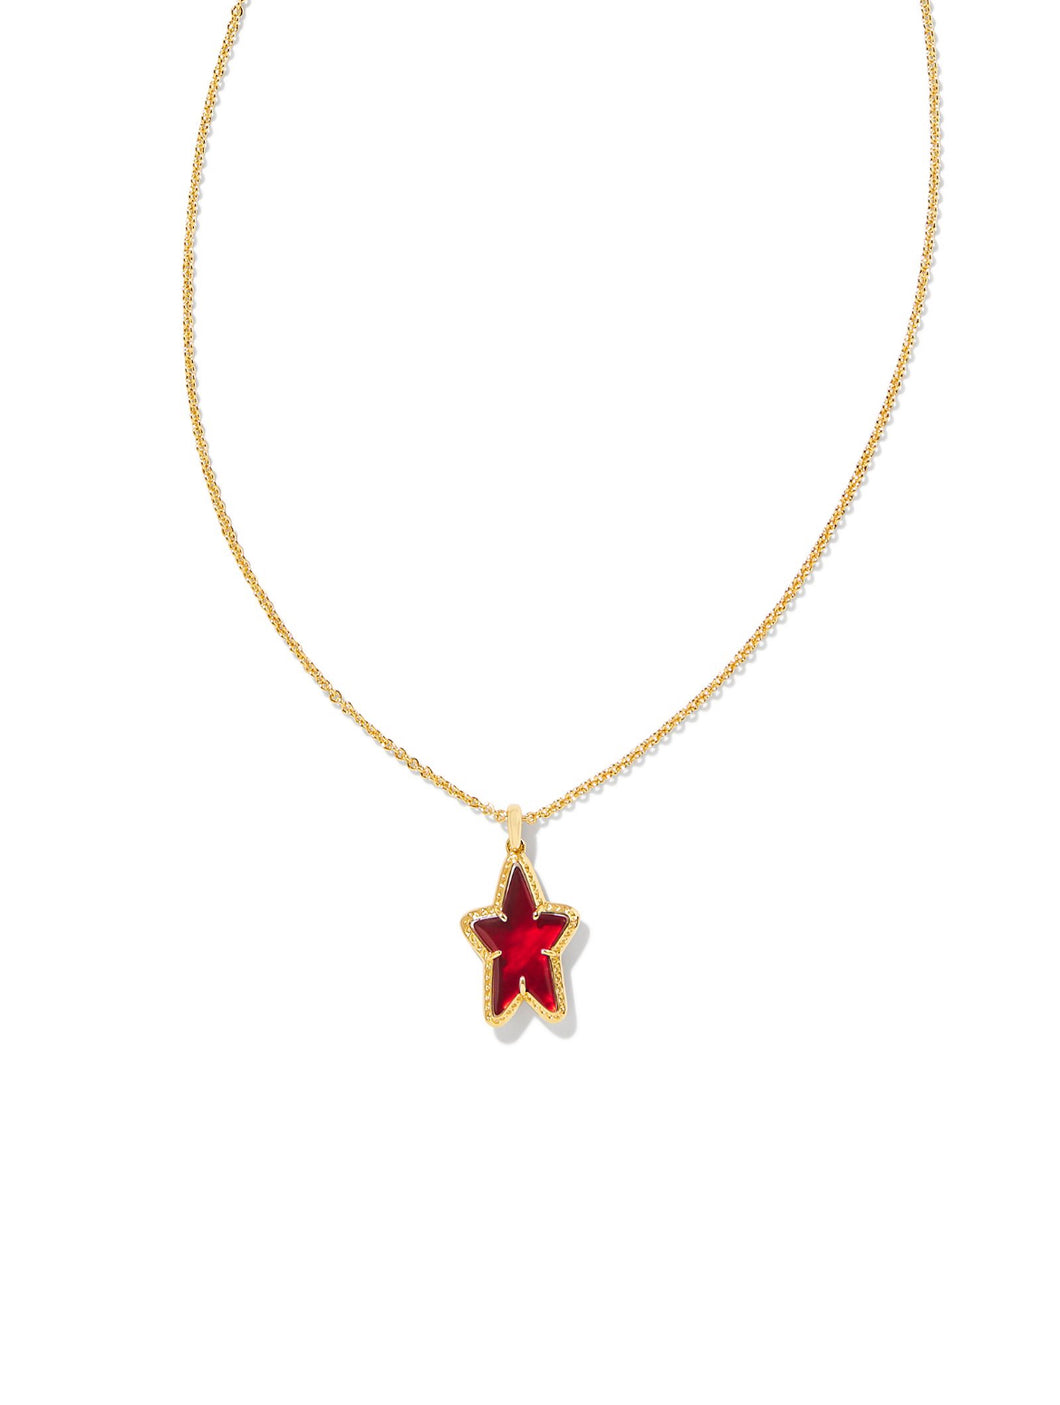 Kendra Scott: Ada Star Short Pendant Necklace in Gold Red Illusion